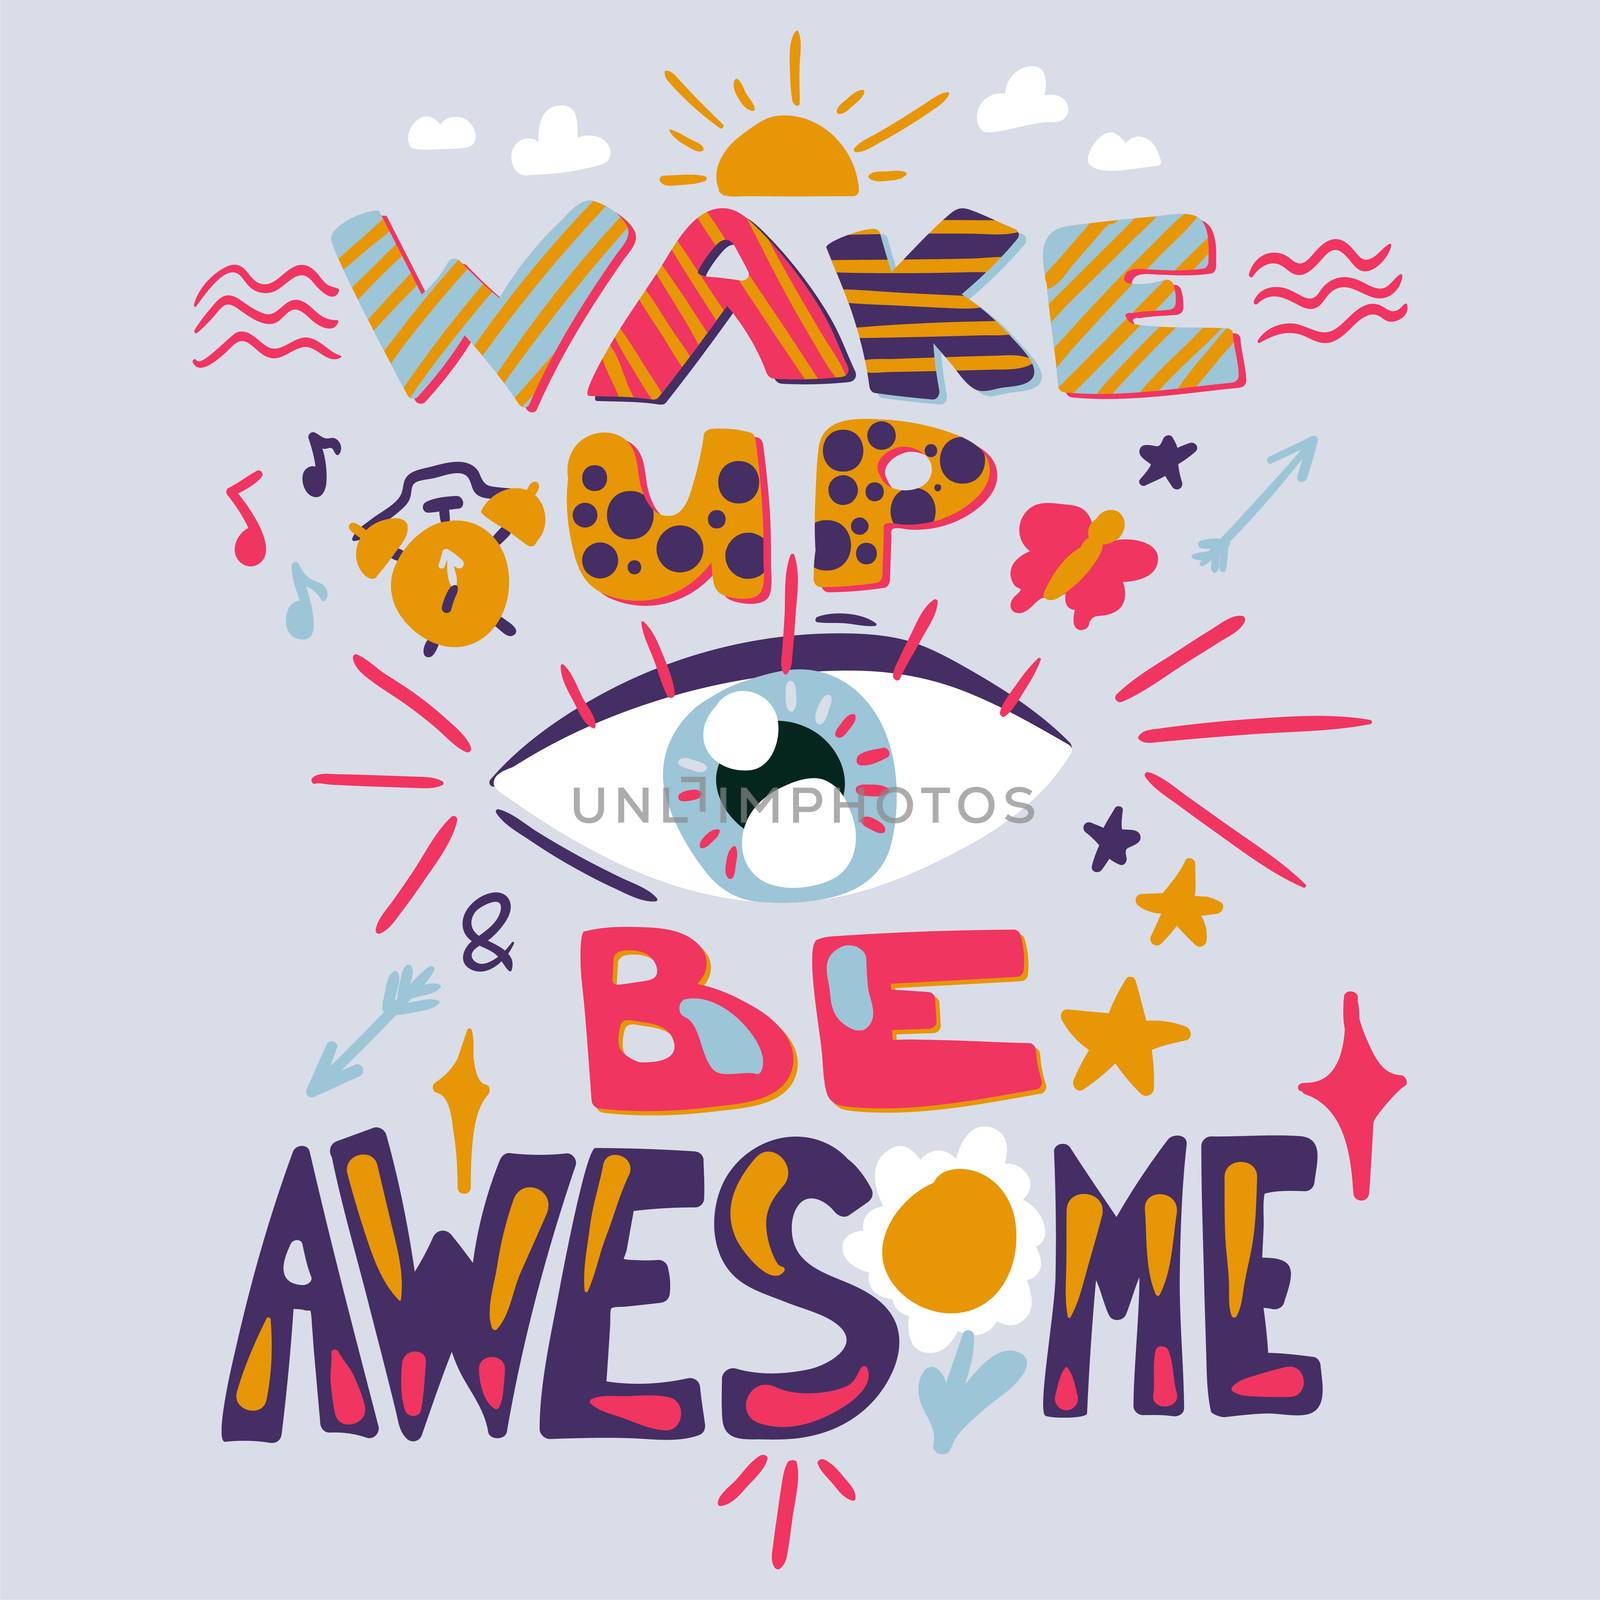 Success Secret - Wake Up and Be Awesome by barsrsind